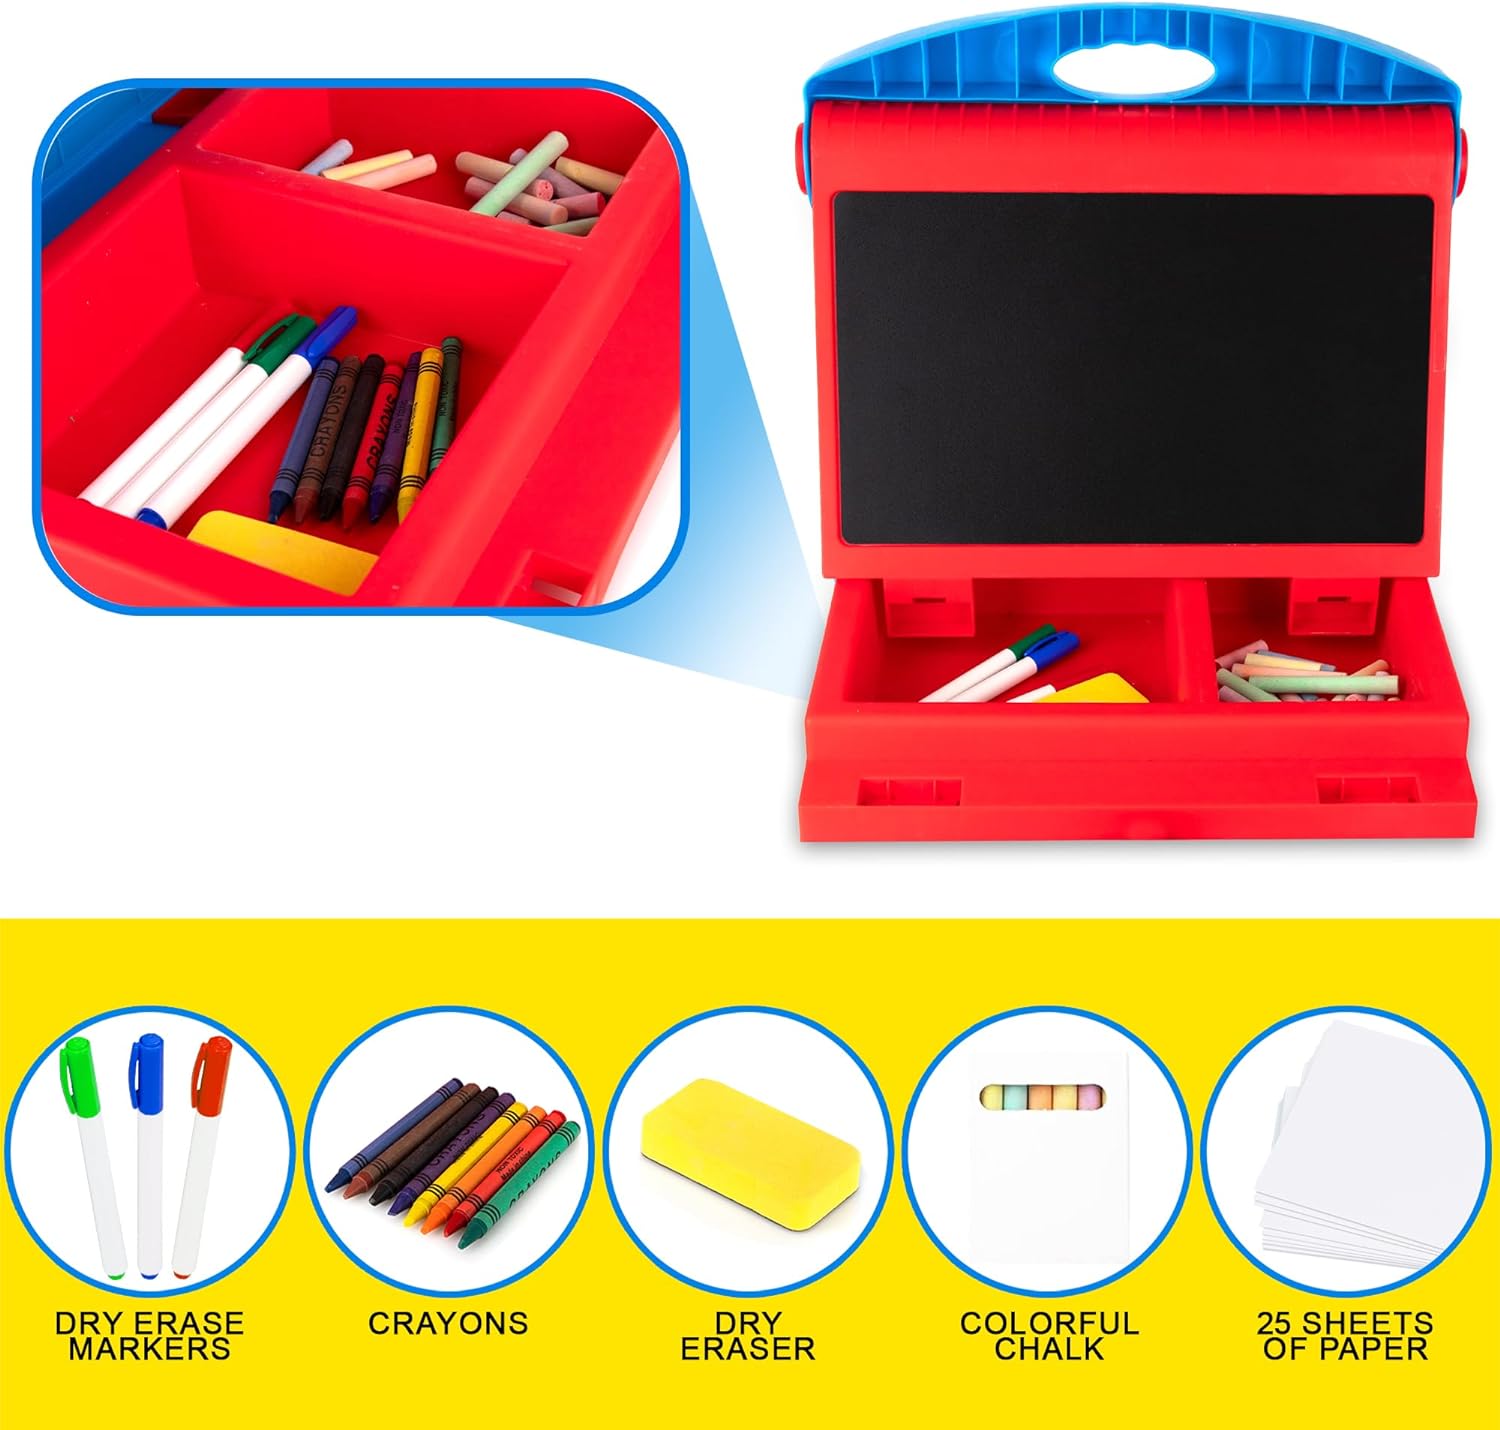 Tabletop Easel for Kids, Table Top Easel Board for Toddlers with Dry Erase Board, Whiteboard, and Chalk Board Easel, Kids Easel Set Includes Chalk, Crayons, and Markers, Kids Art Supplies Ages 6-8